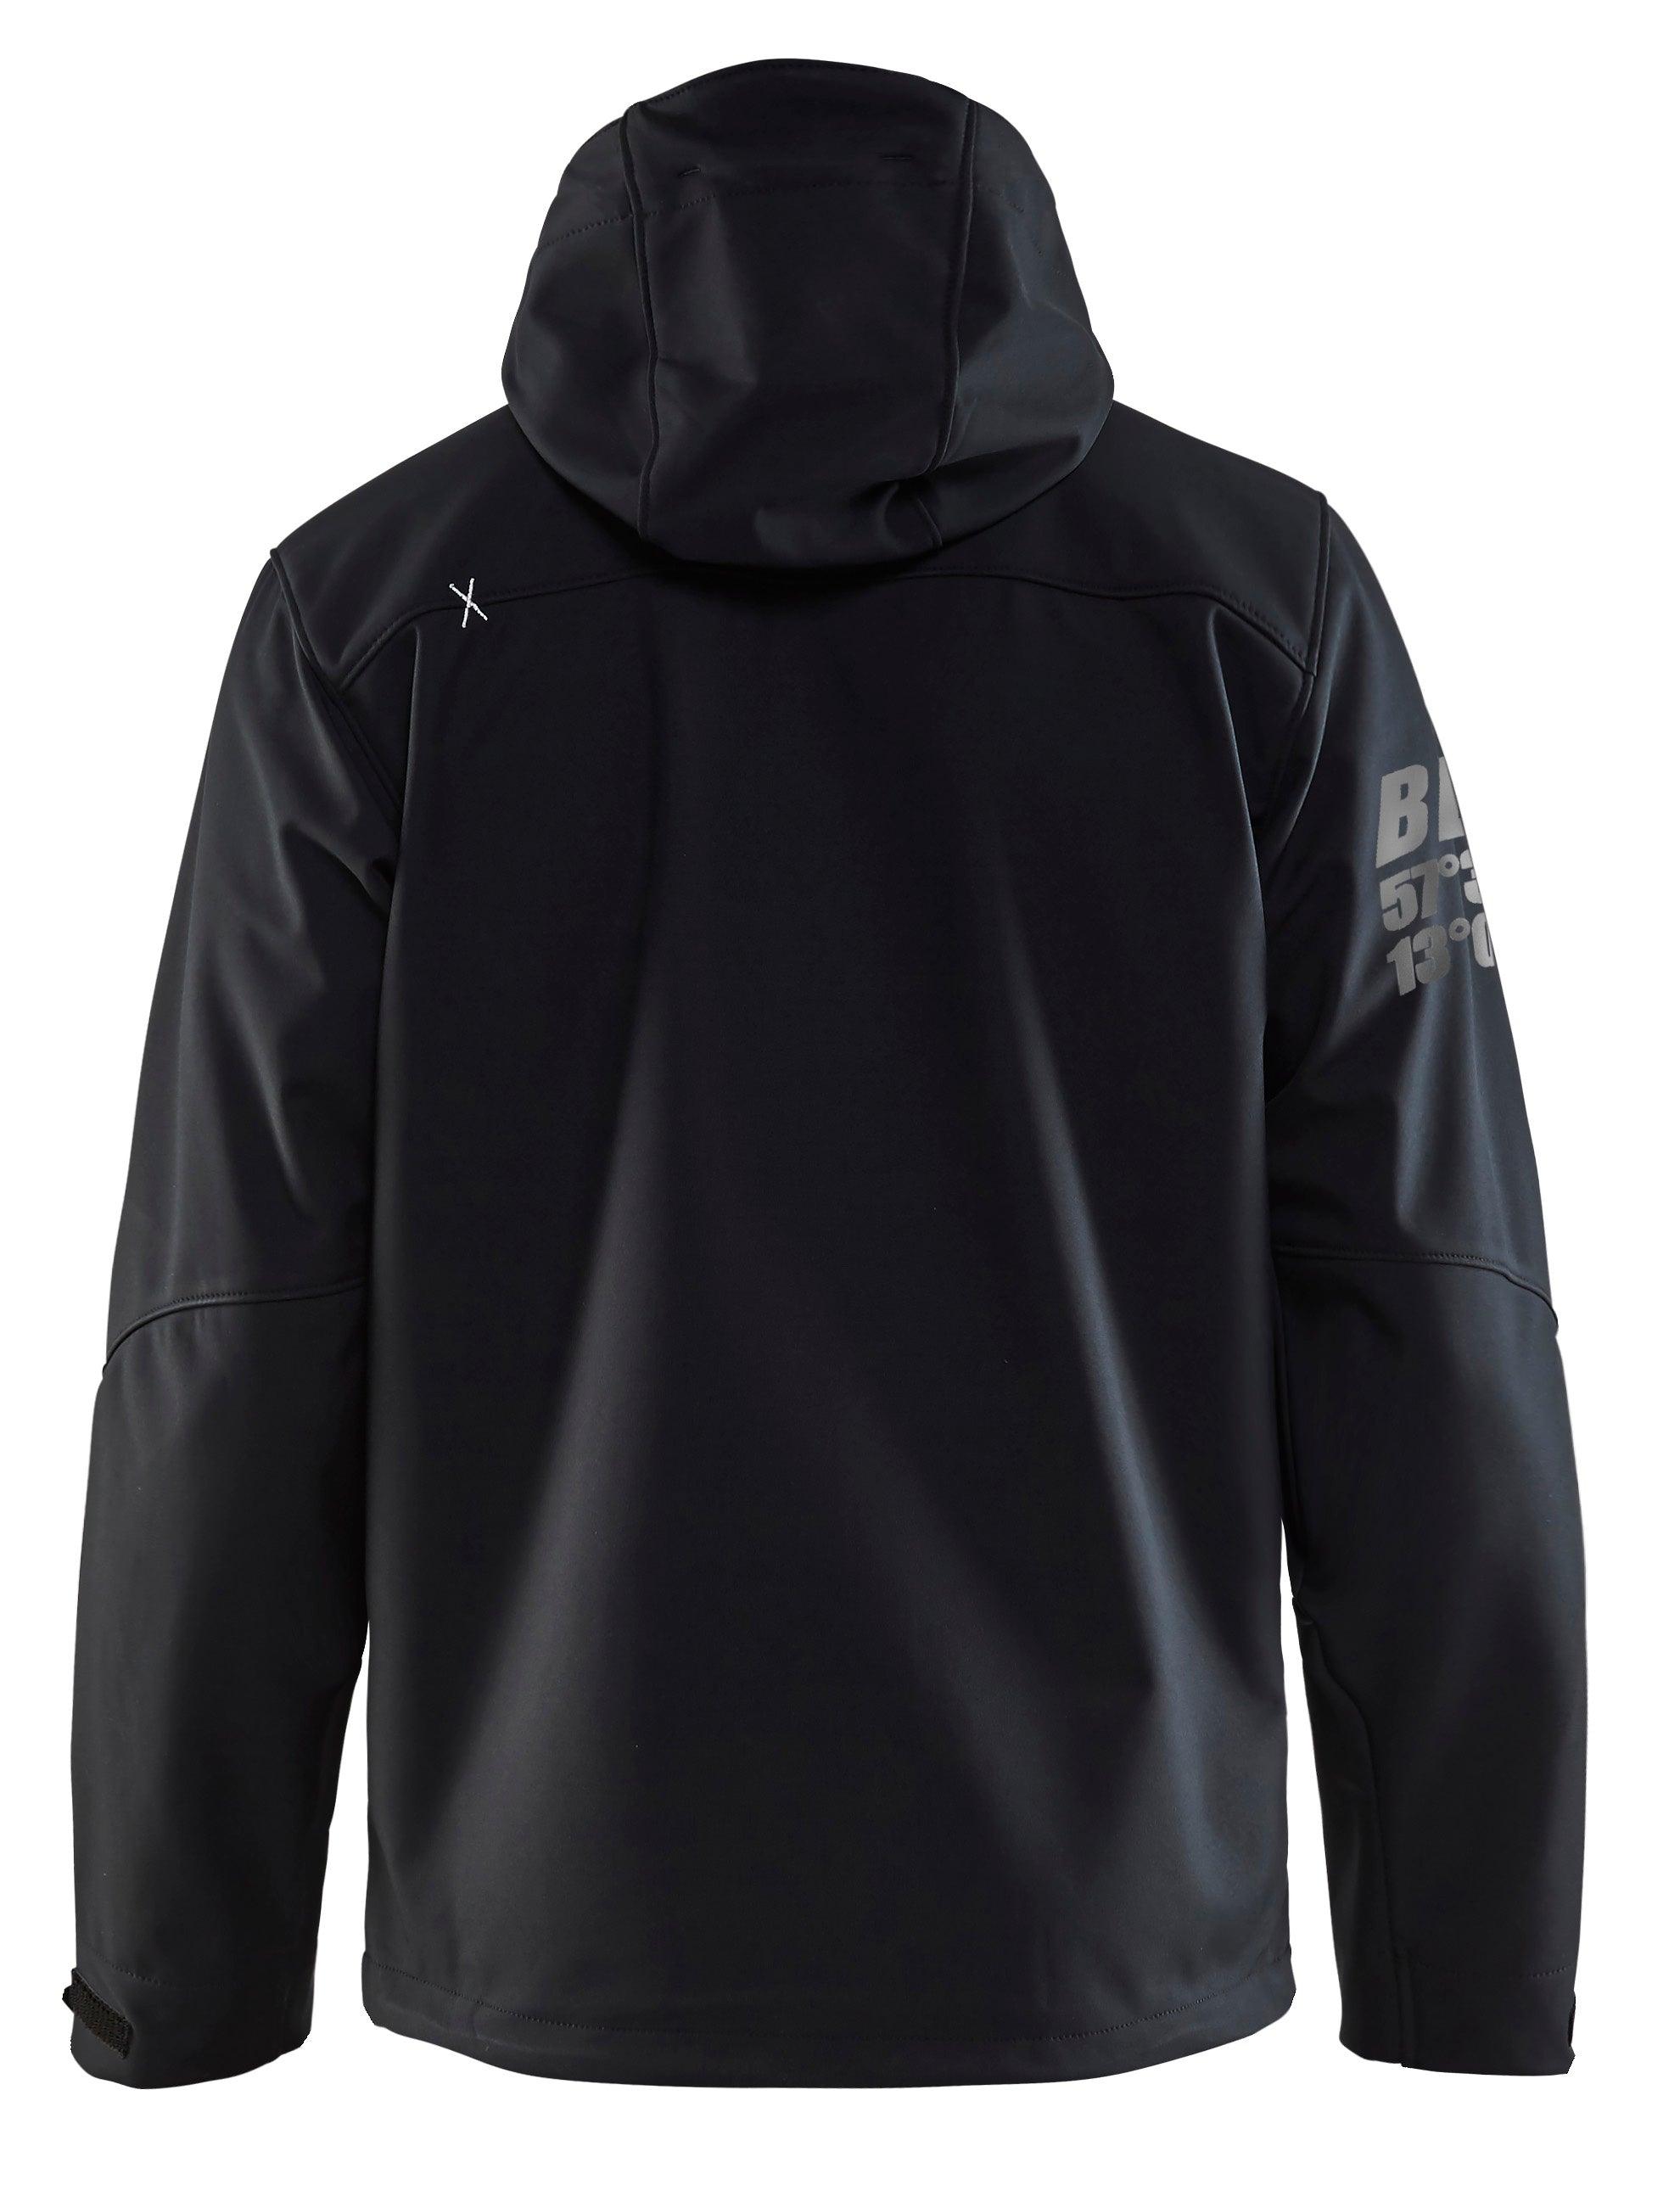 Blaklader 4939 Hooded Water-Resistant Pro Softshell - Black/Silver - Trusted Gear Company LLC